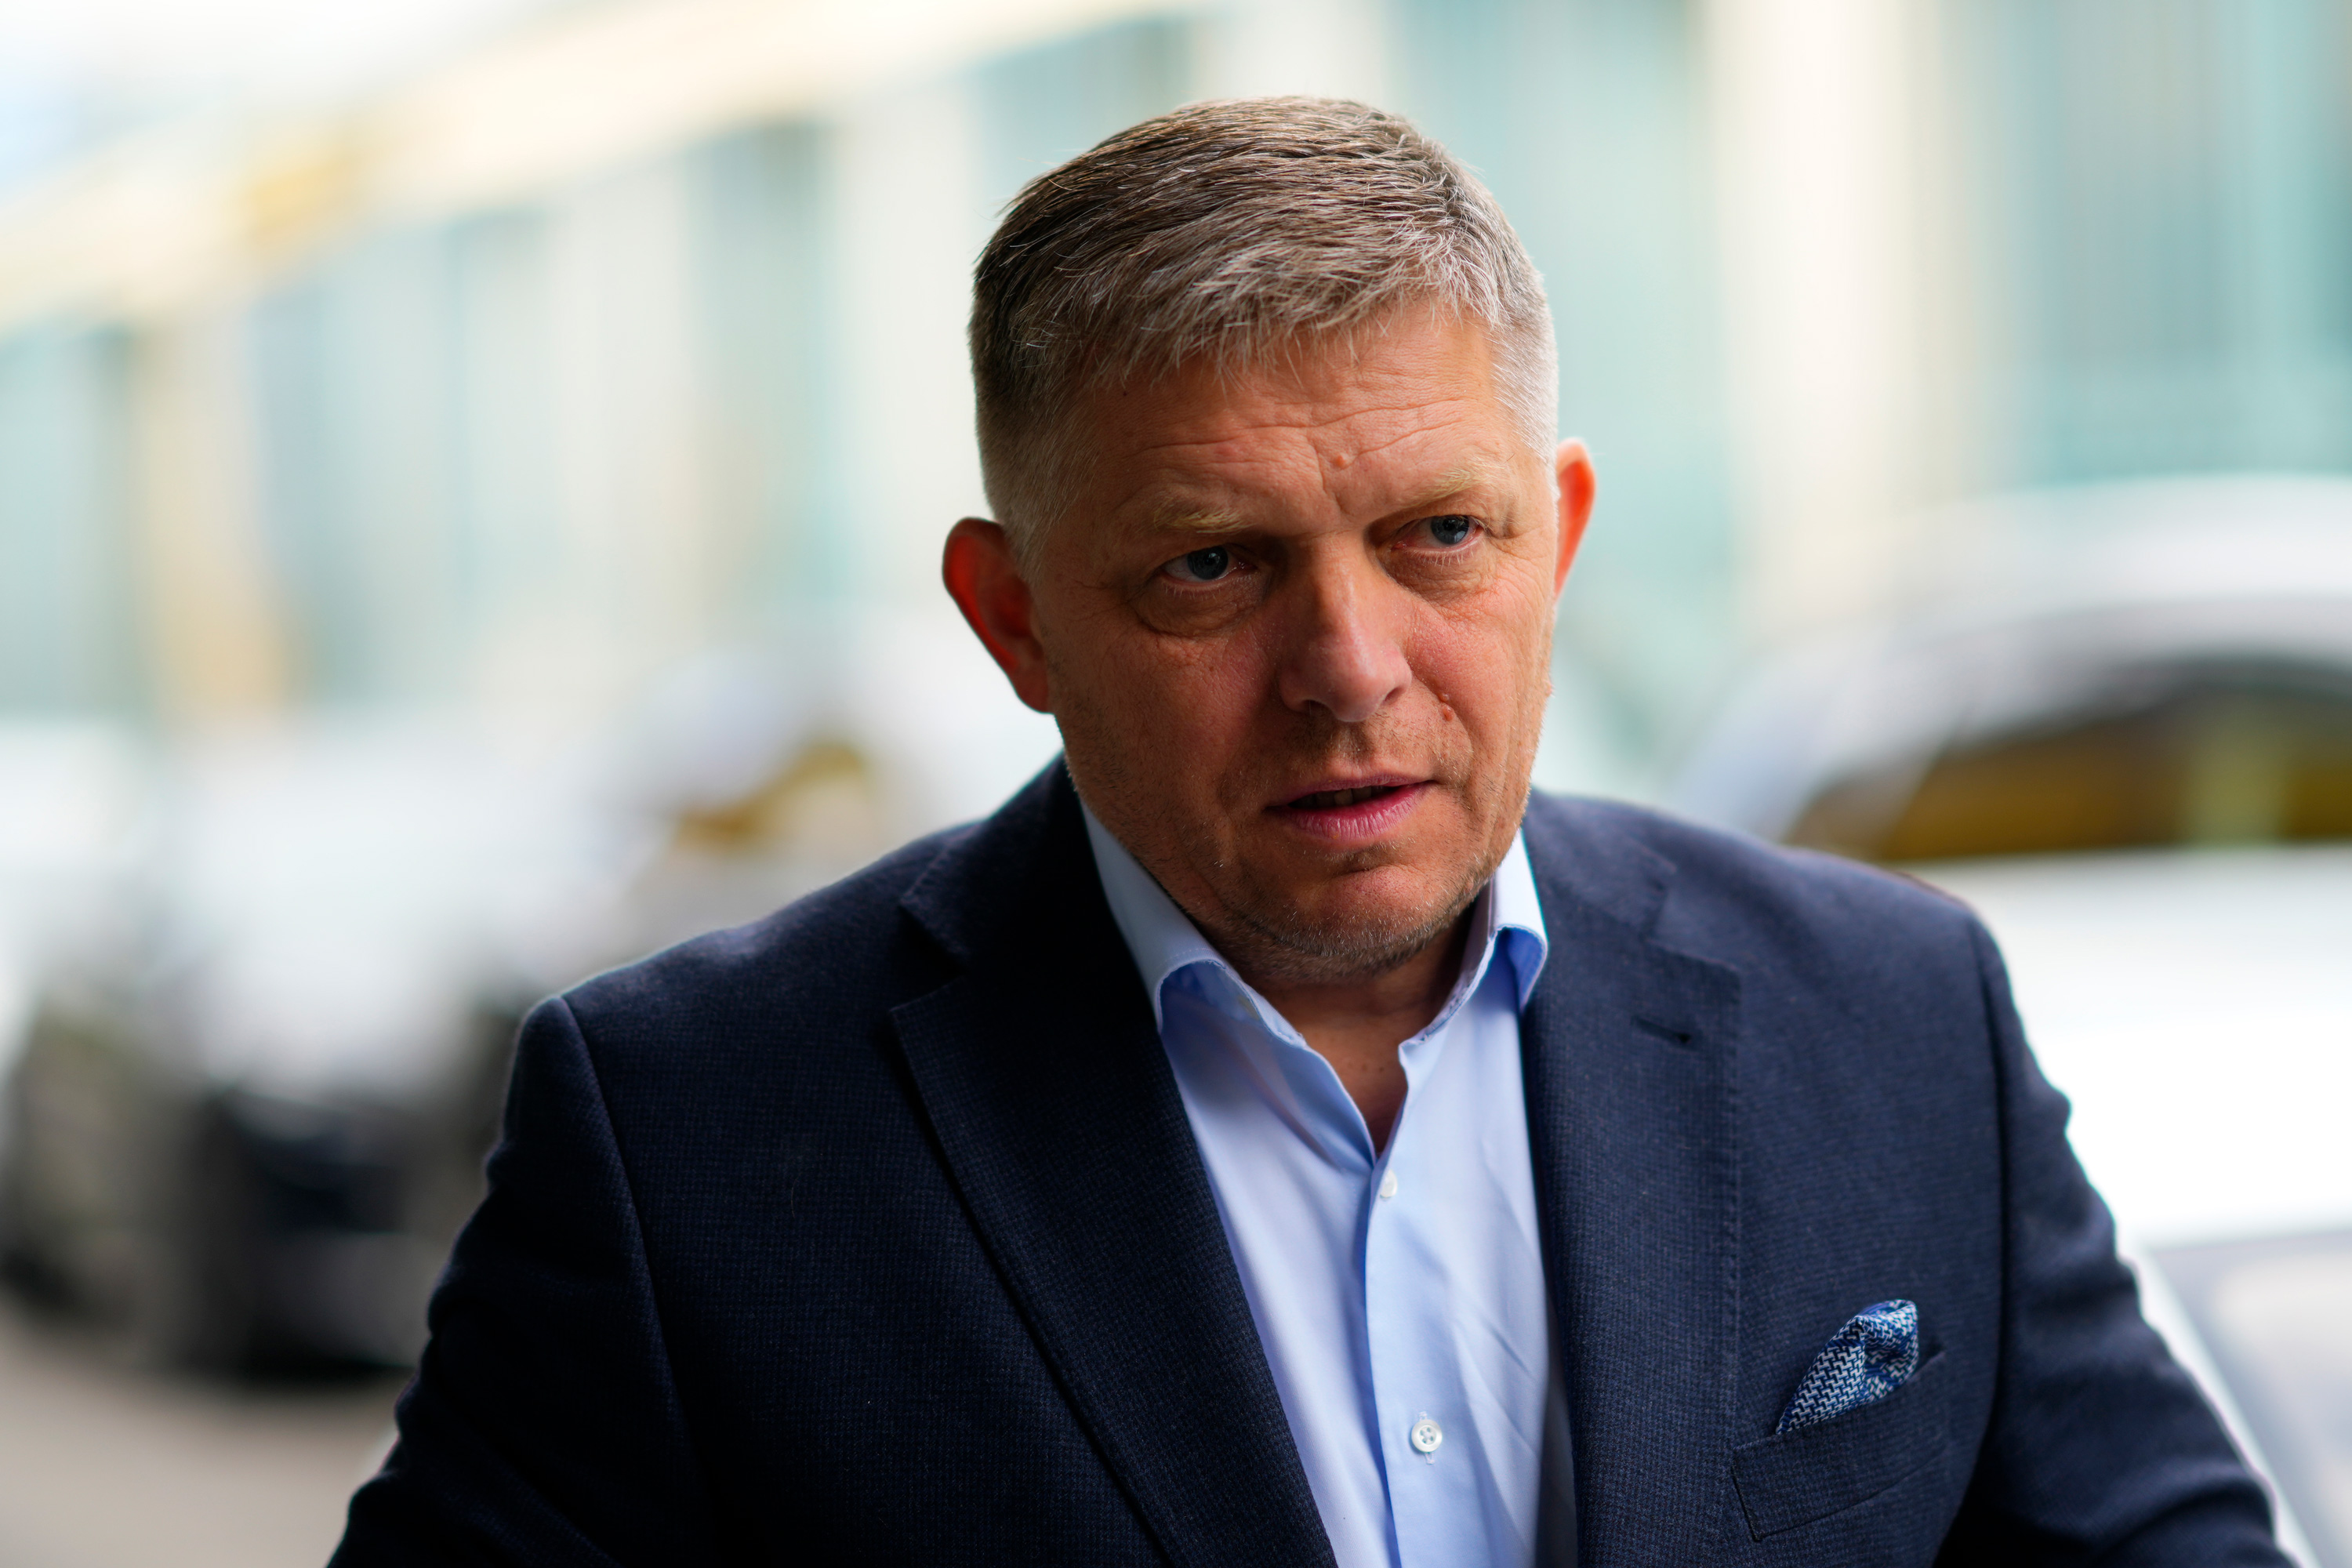 Chairman of SMER-Social Democracy party Robert Fico arrives at his party's headquarters day after an early parliamentary election in Bratislava, Slovakia, on October 1, 2023.